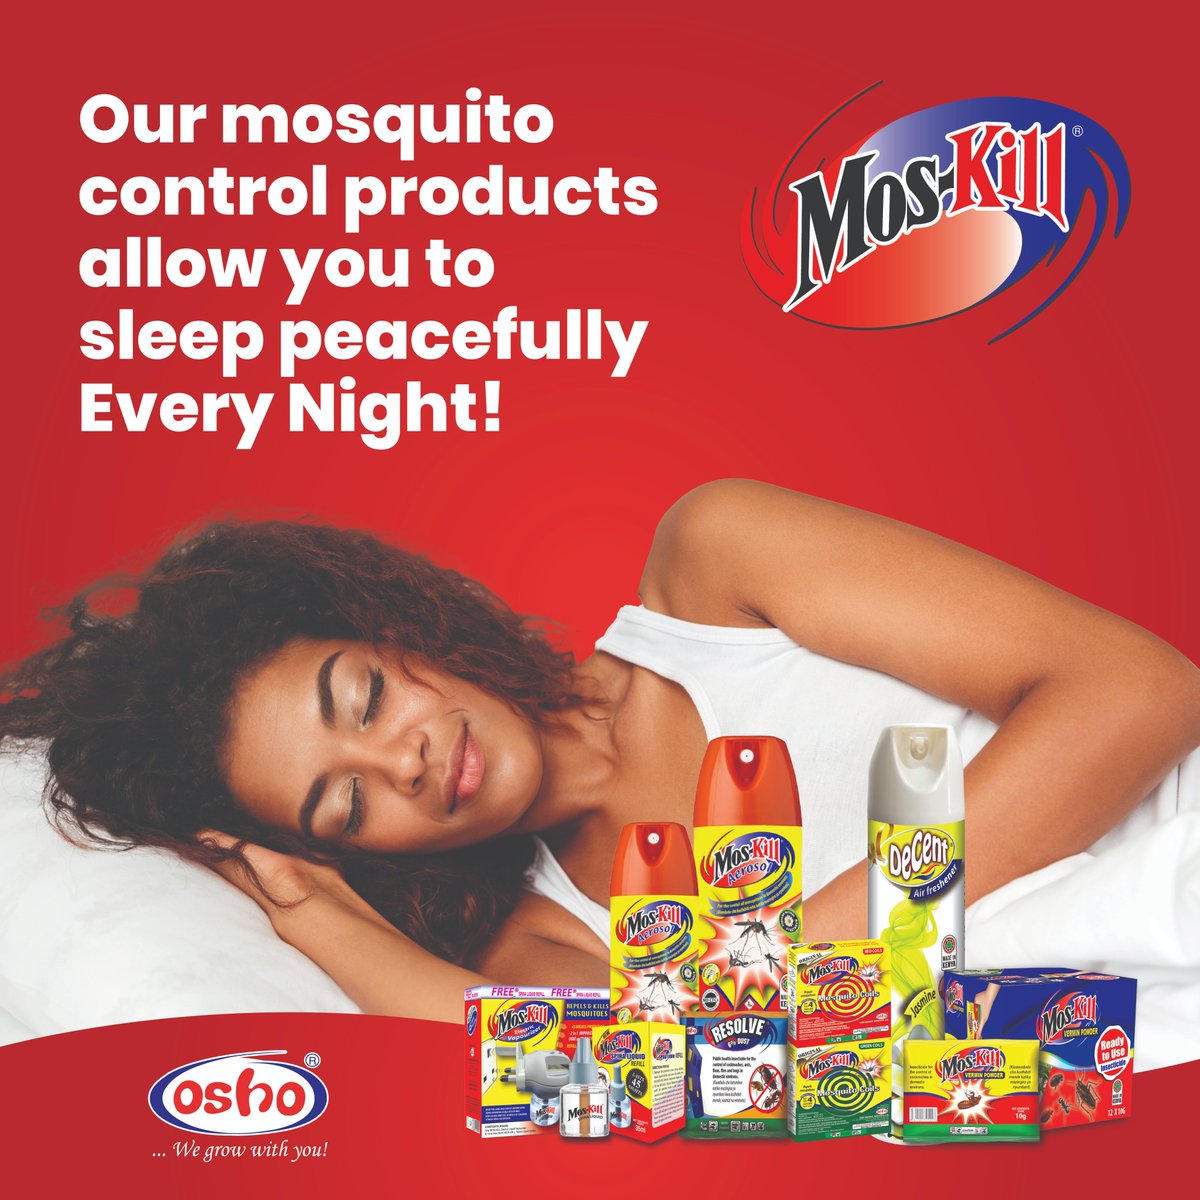 A peaceful night’s sleep allows you to perform at your peak during the day. Noisy mosquitoes may leave you sleepless all night and grumpy all day. Get Mos-Kill Coils, Aerosols or Vapourisersfor a good night’s rest!​ Available in leading supermarkets!